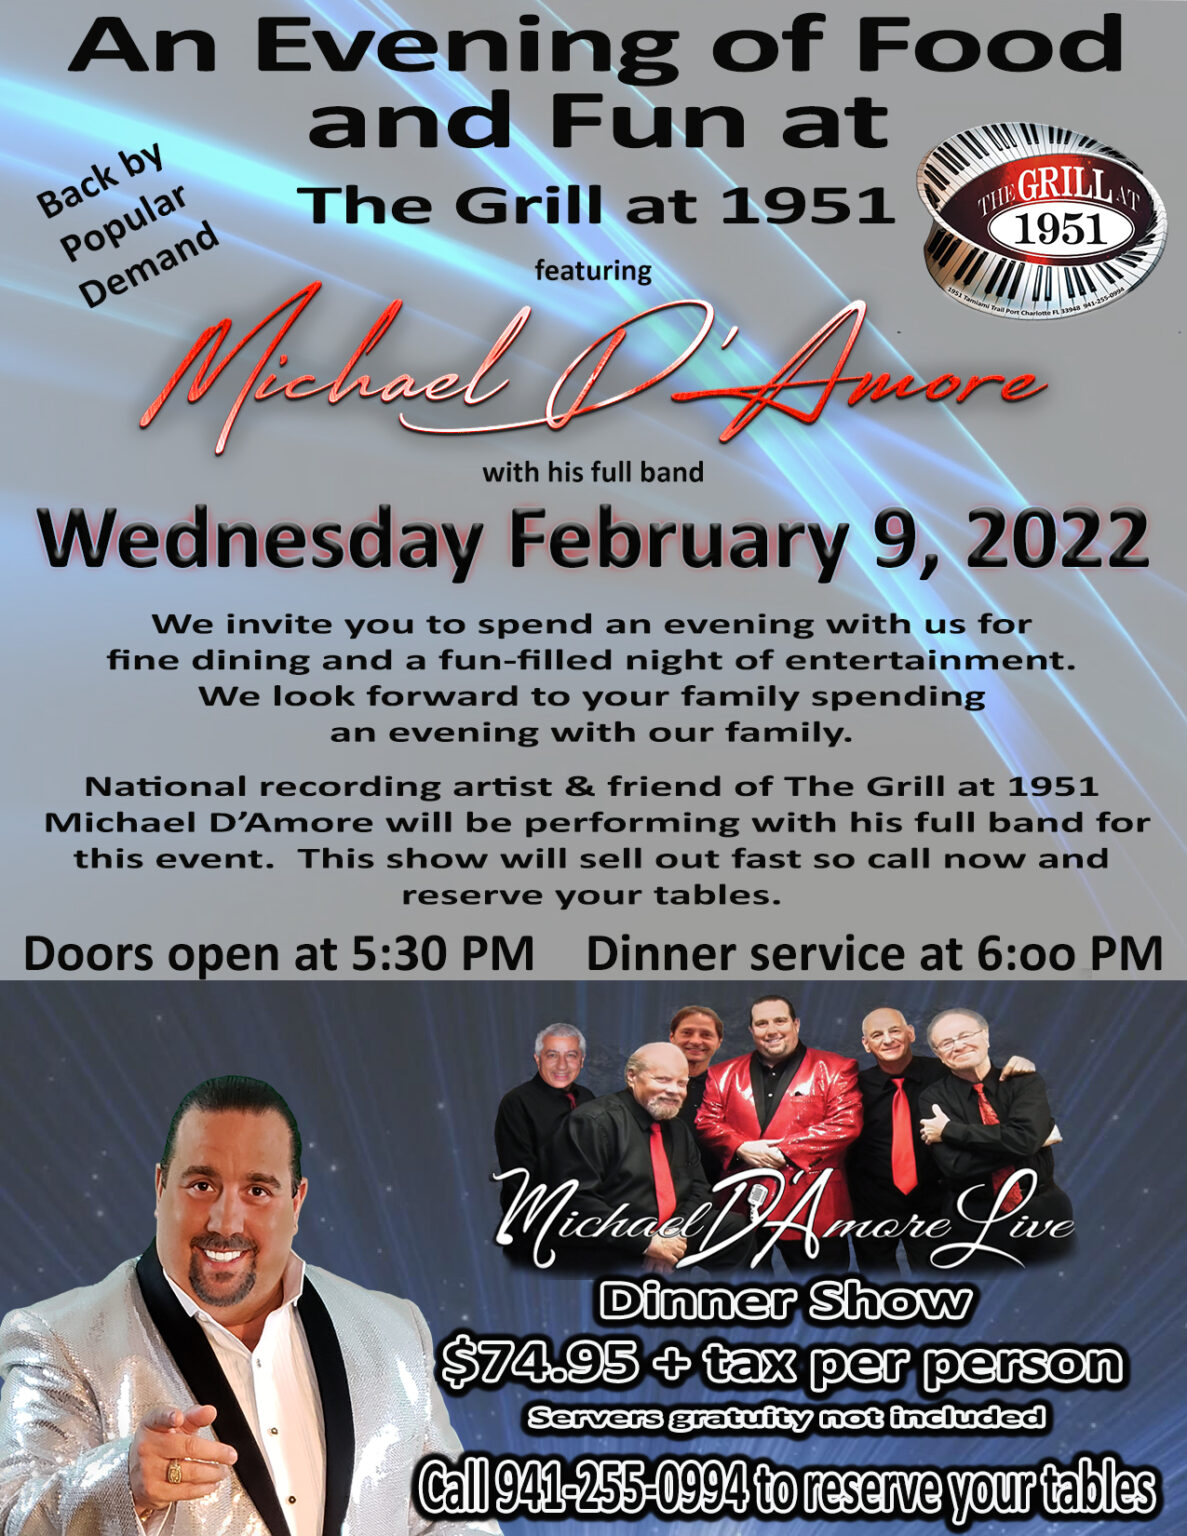 Dinner Show at Grill at 1951 2-9-22 - Michael D'Amore